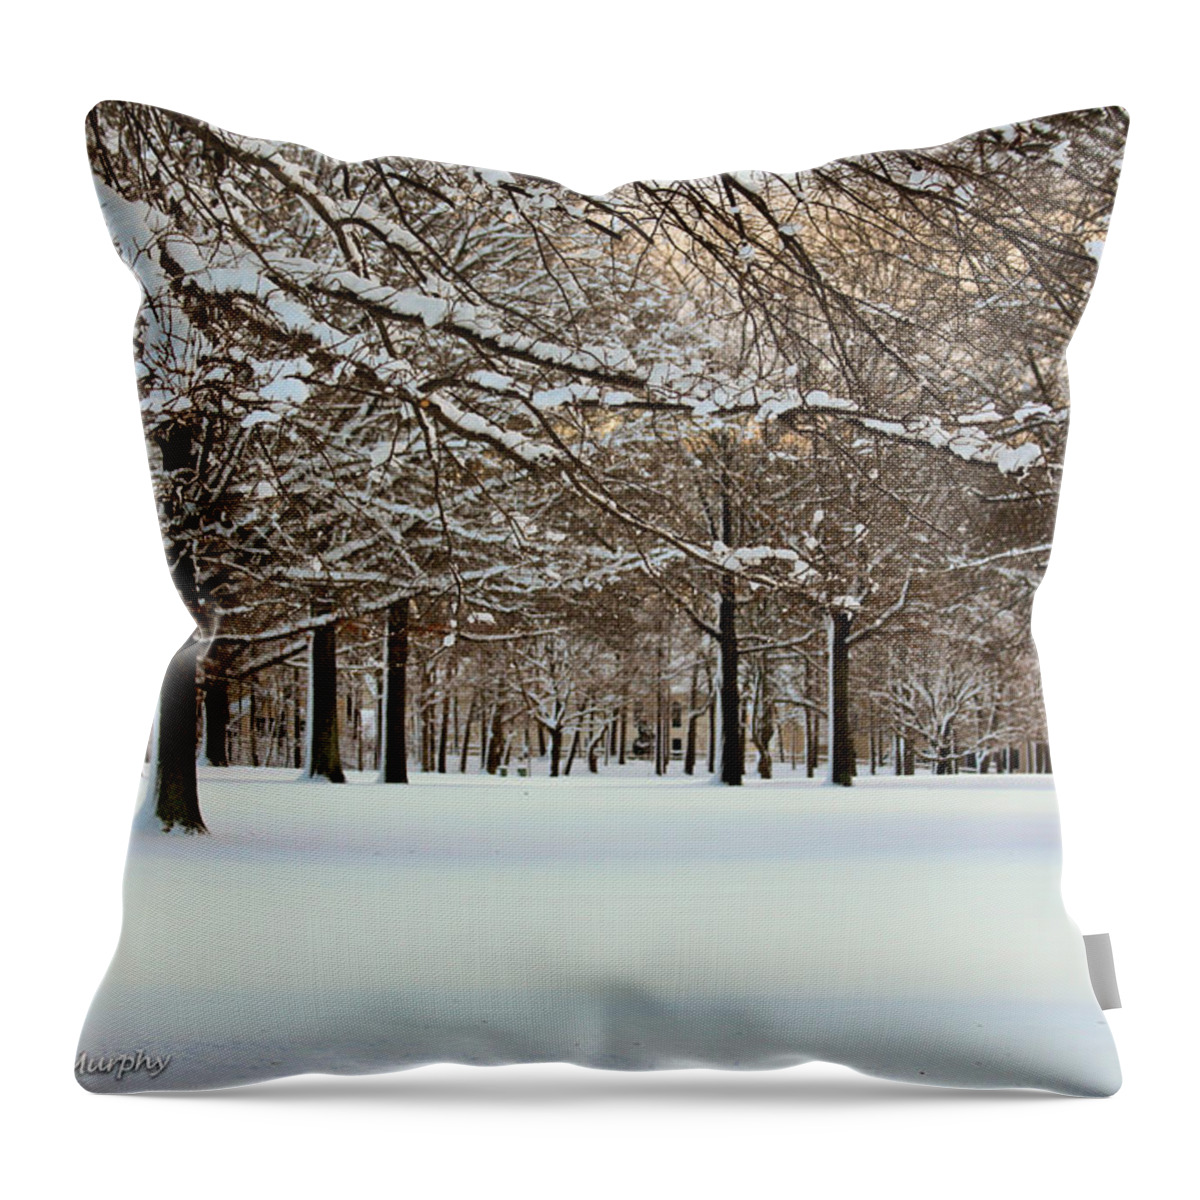 Winter Scenes Throw Pillow featuring the photograph Winter Snow by Ann Murphy